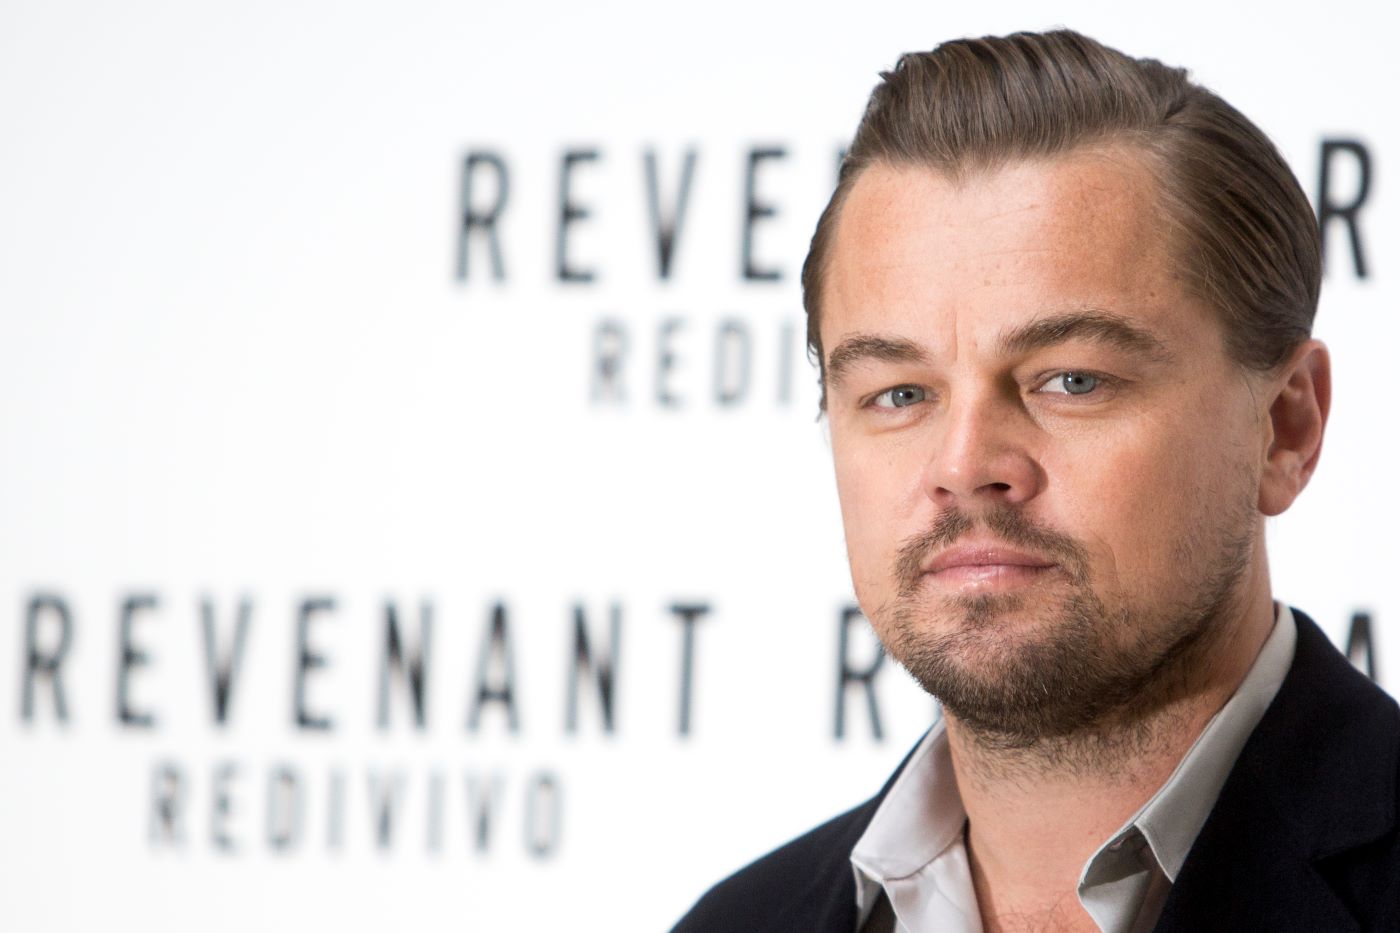 Leonardo DiCaprio, star of the revenant, dressed in a suit jacket and a collared shirt standing in front of a white background with Revenant written in black text.